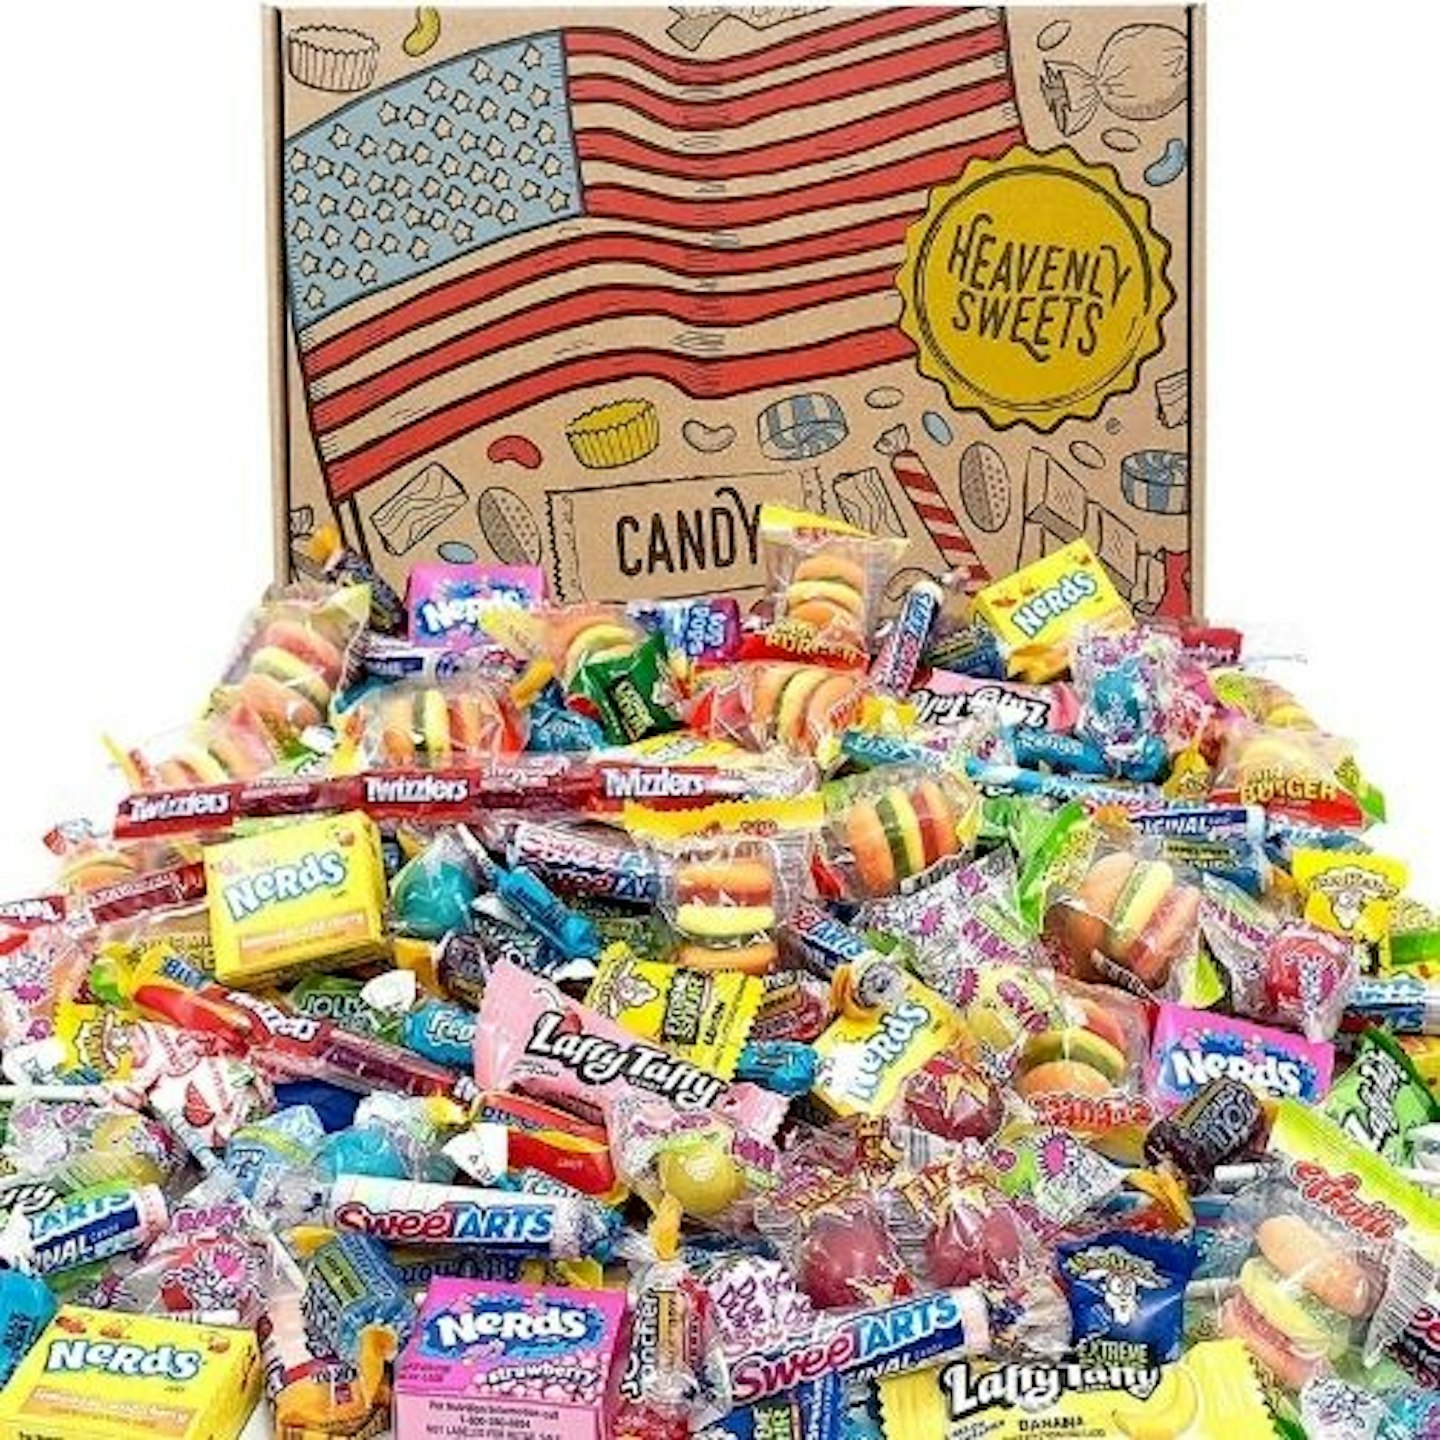 Heavenly Sweets American Candy Party Gift Box